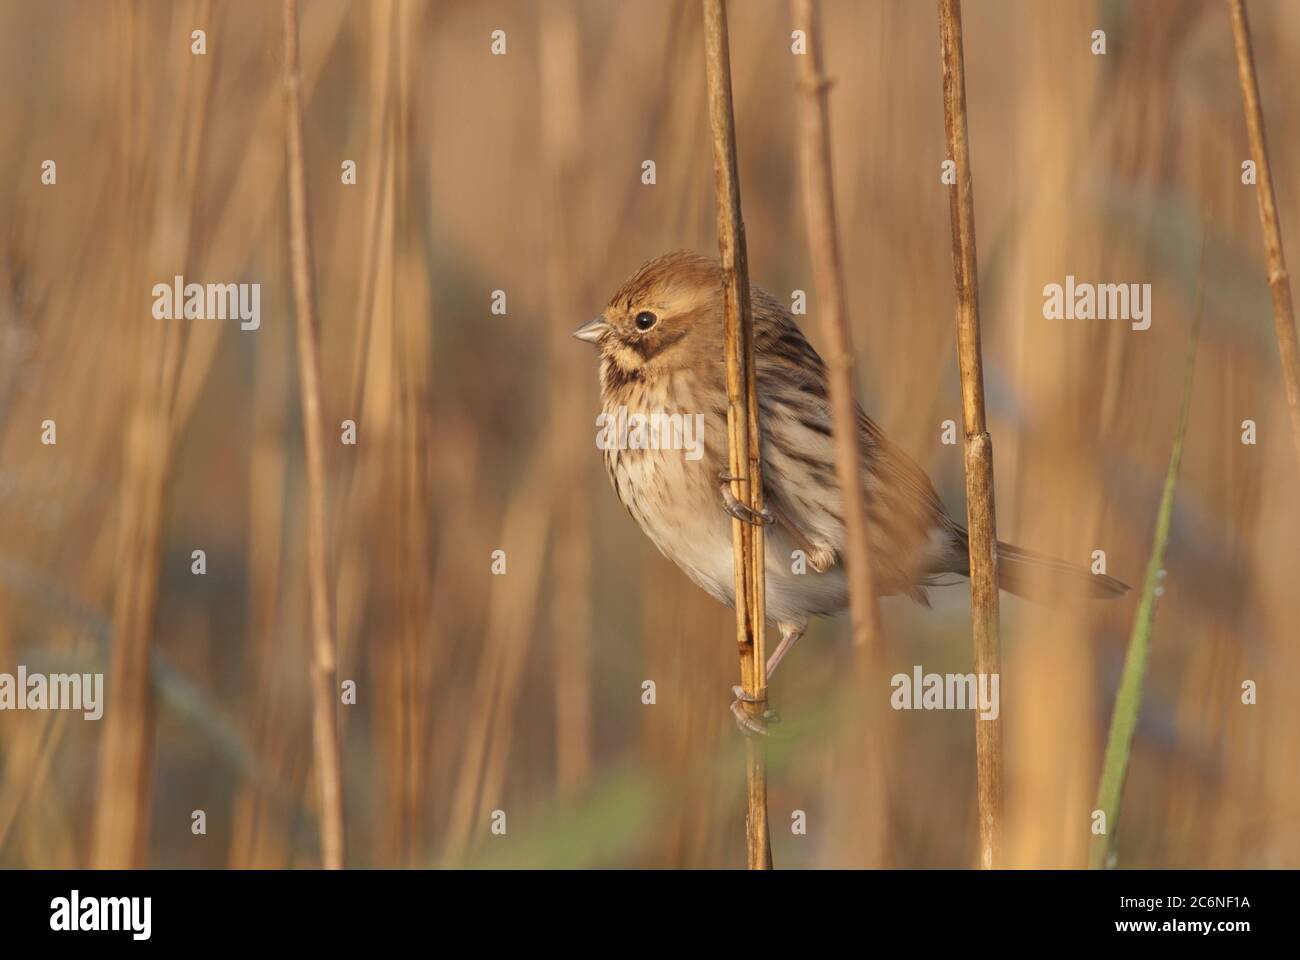 Reed bunting, Emberiza schoeniclus, female perched in reeds, Norfolk, Fen Stock Photo